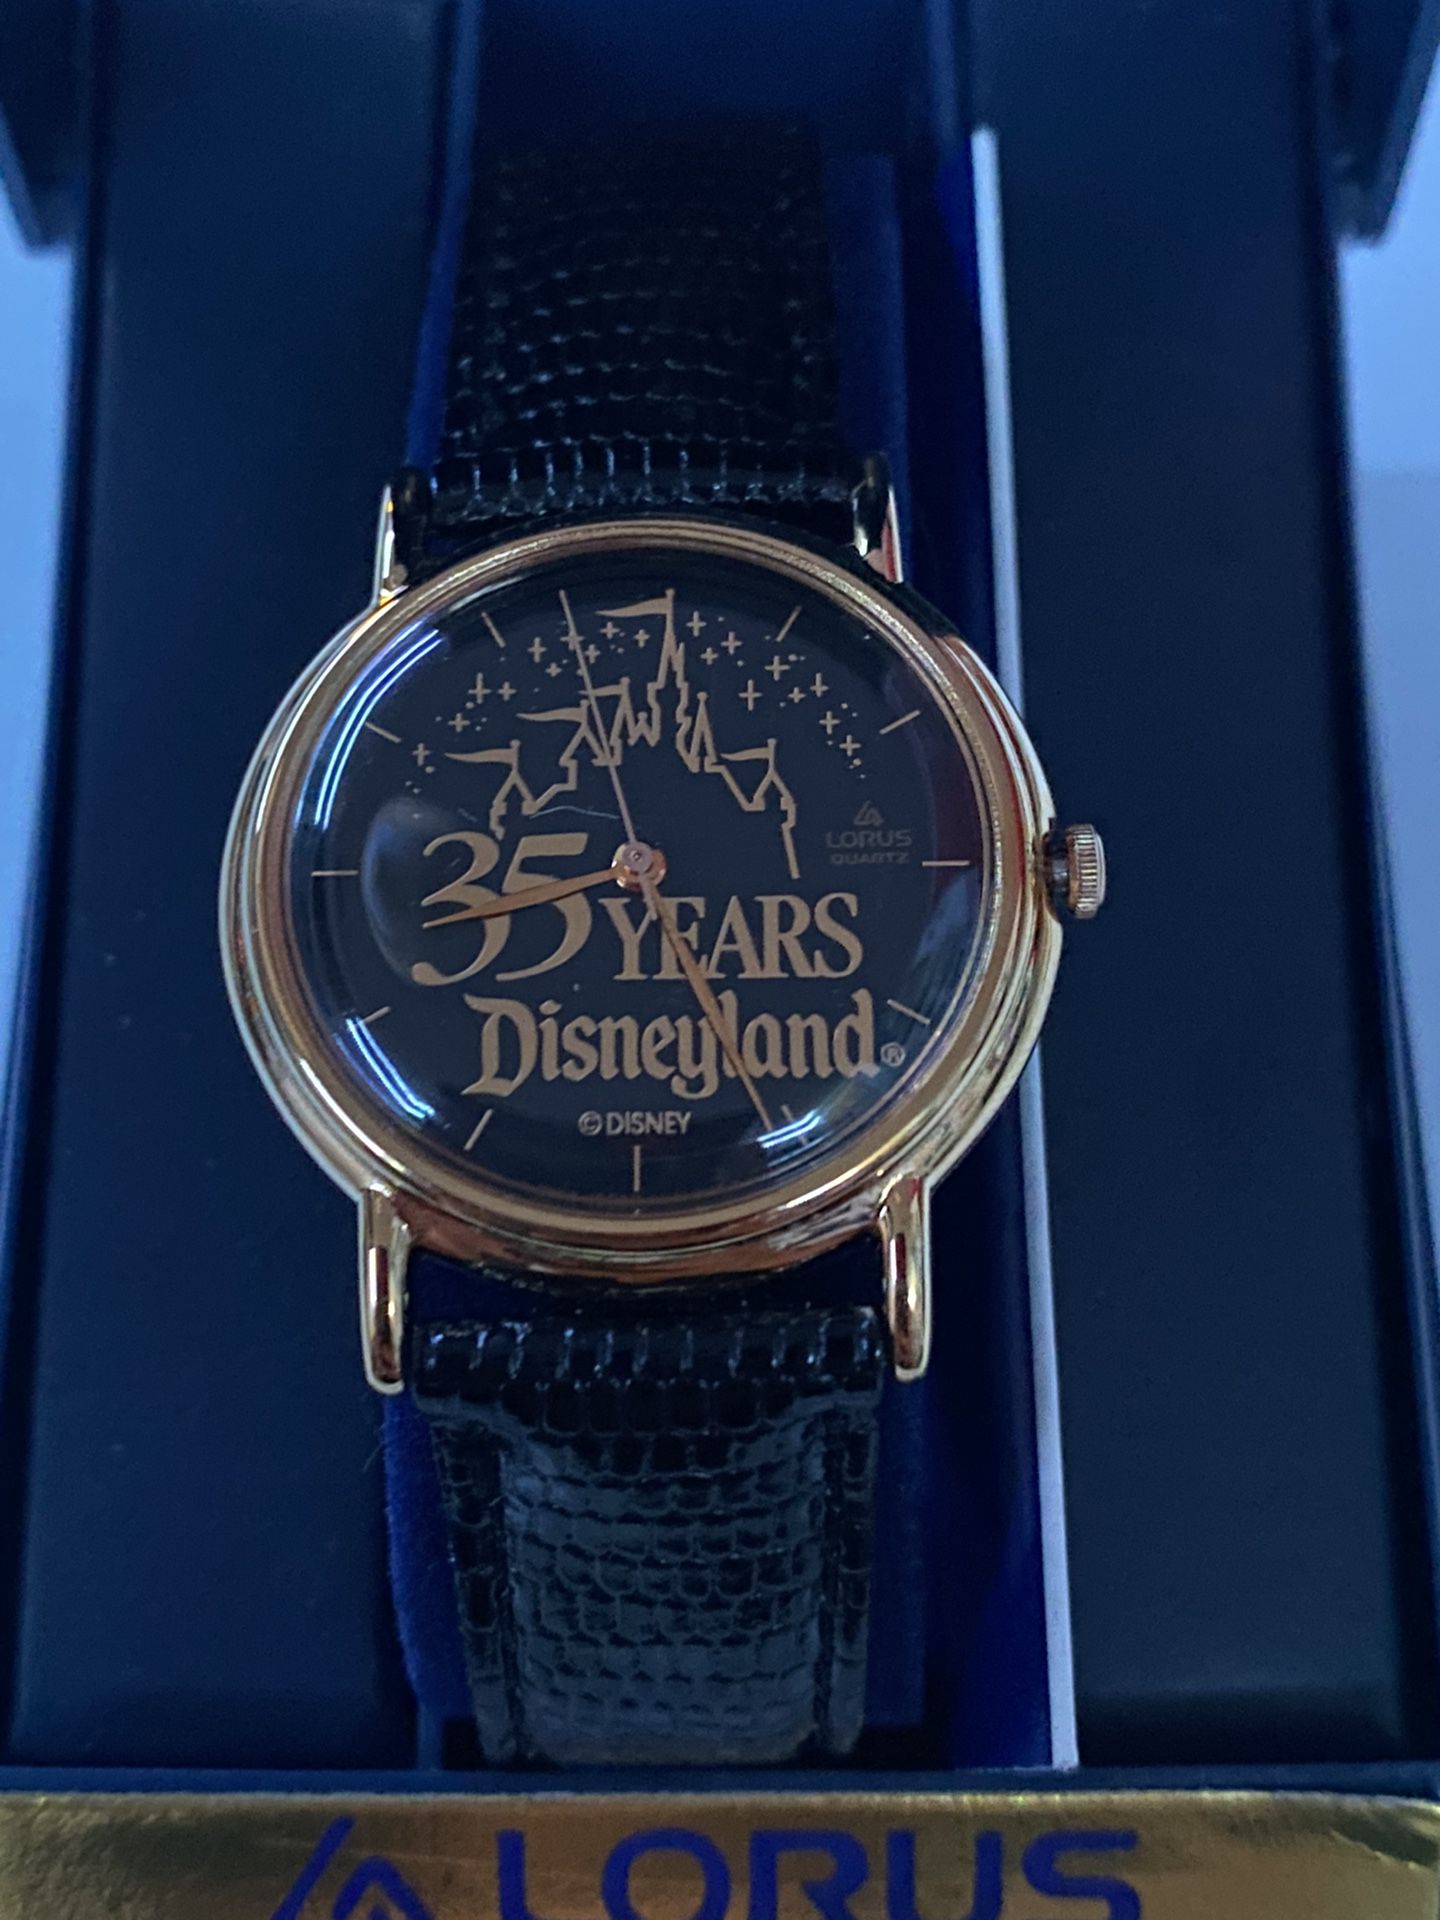 35 Years Disneyland Lorus/Mickey Mouse Watch for Sale in Anaheim, CA -  OfferUp